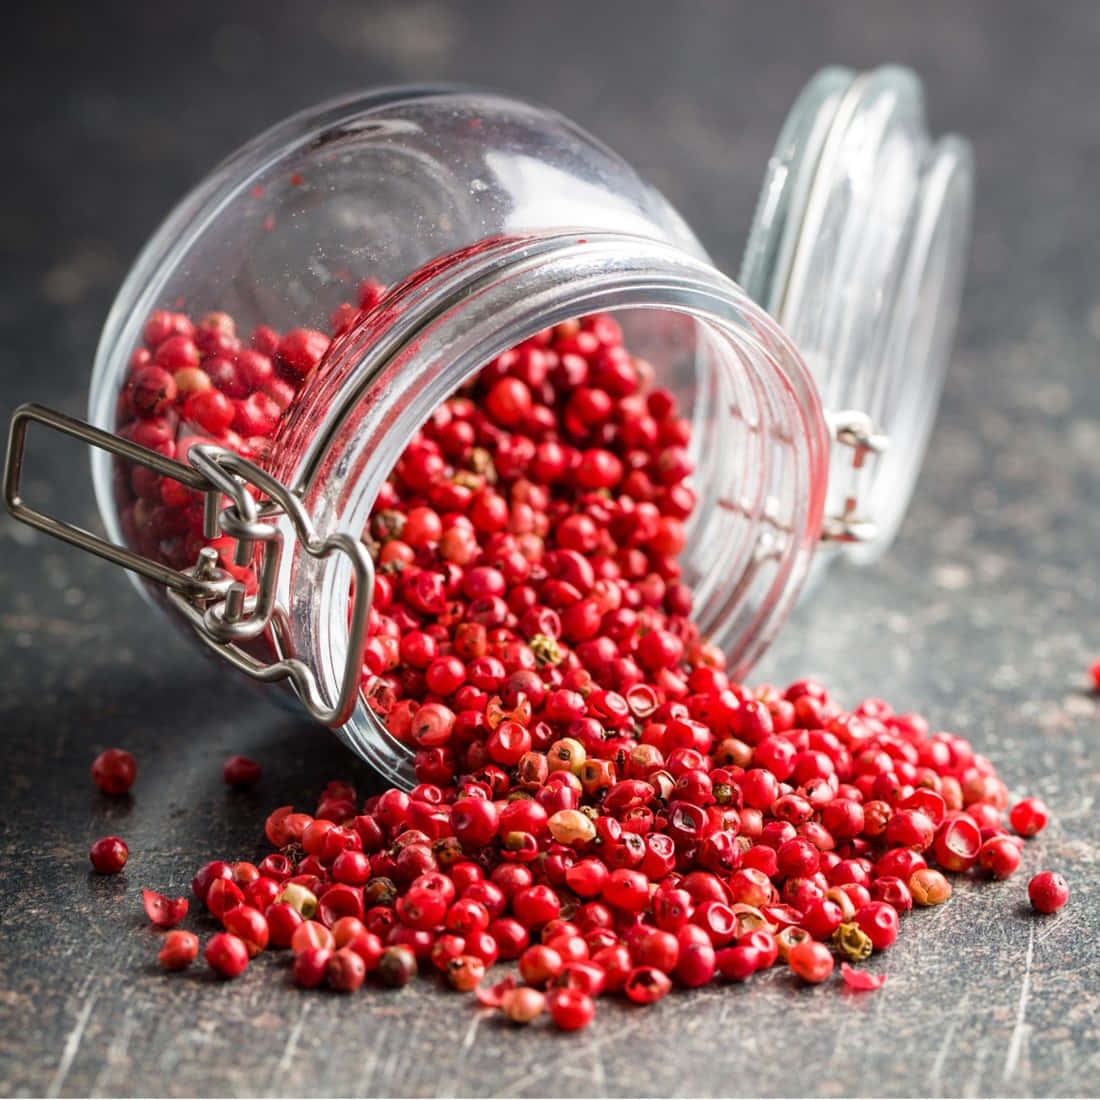 A close-up view of vibrant pink peppercorns on a wooden surface. Wallpaper